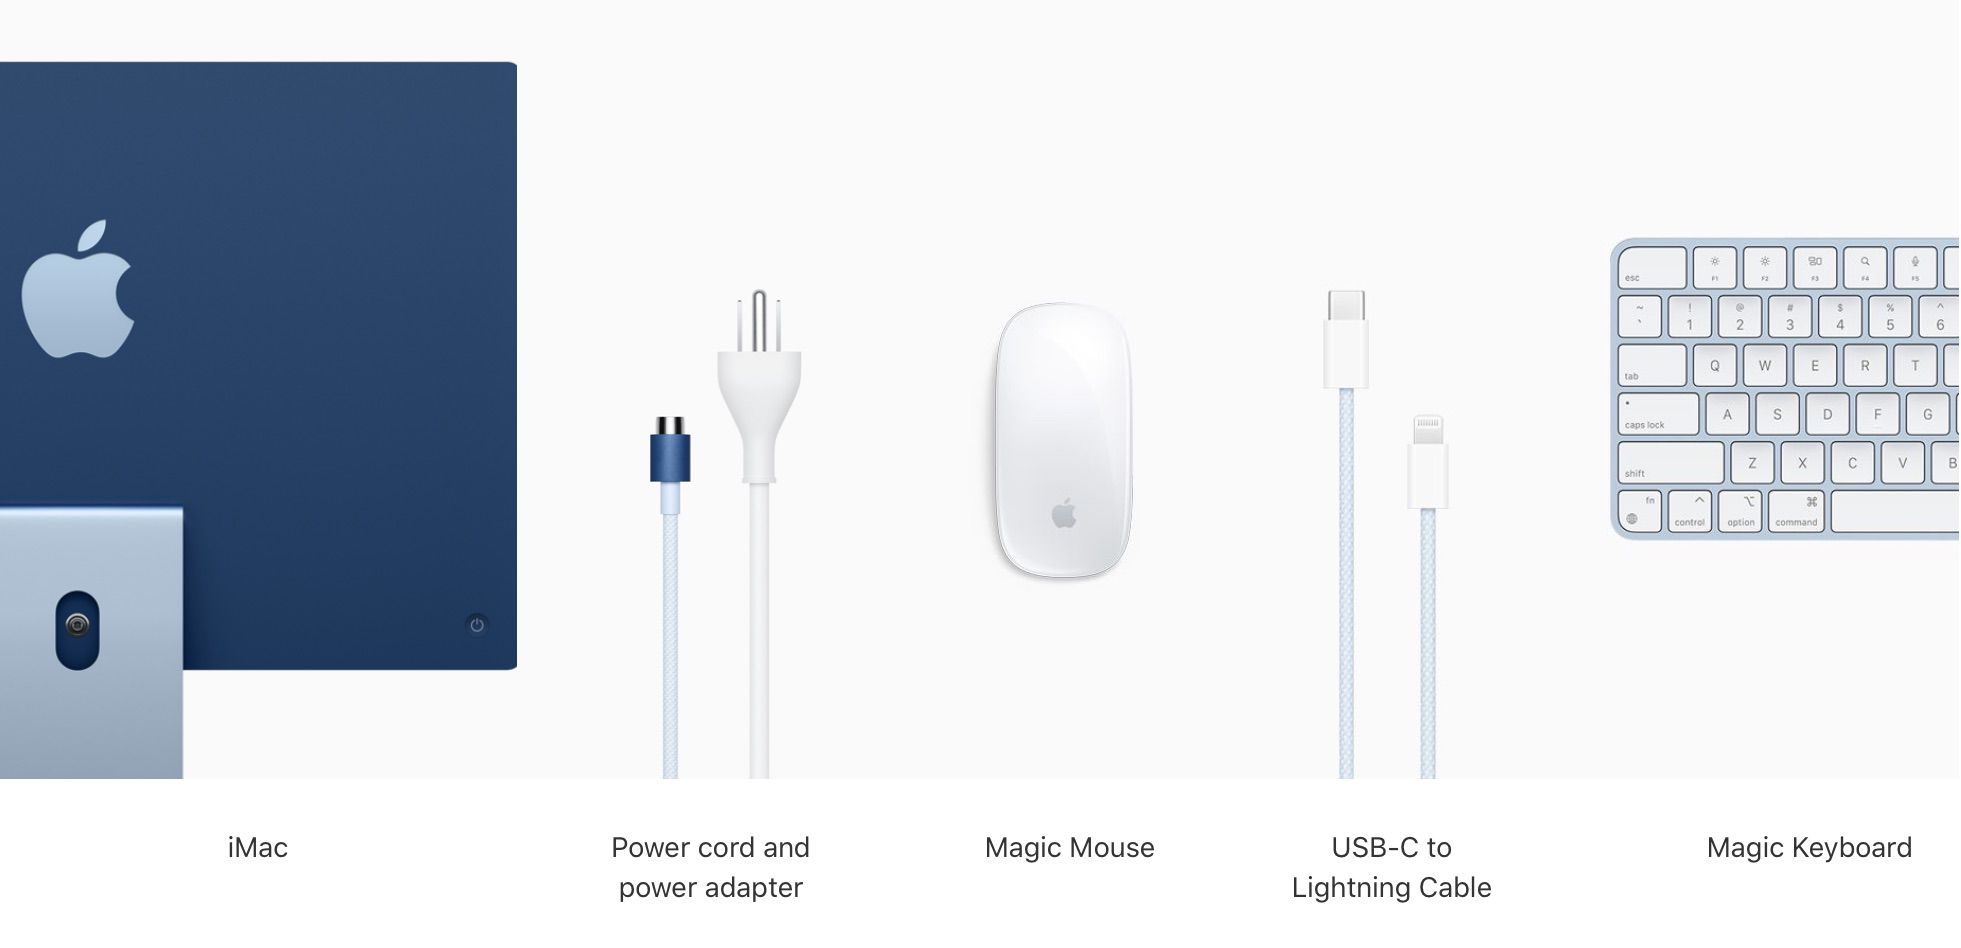 ingesteld Boom Ontaarden Apple's Bright New iMacs Come With Color-Matched Magic Keyboard, Magic  Mouse, Power Cord and USB-C Cable - MacRumors